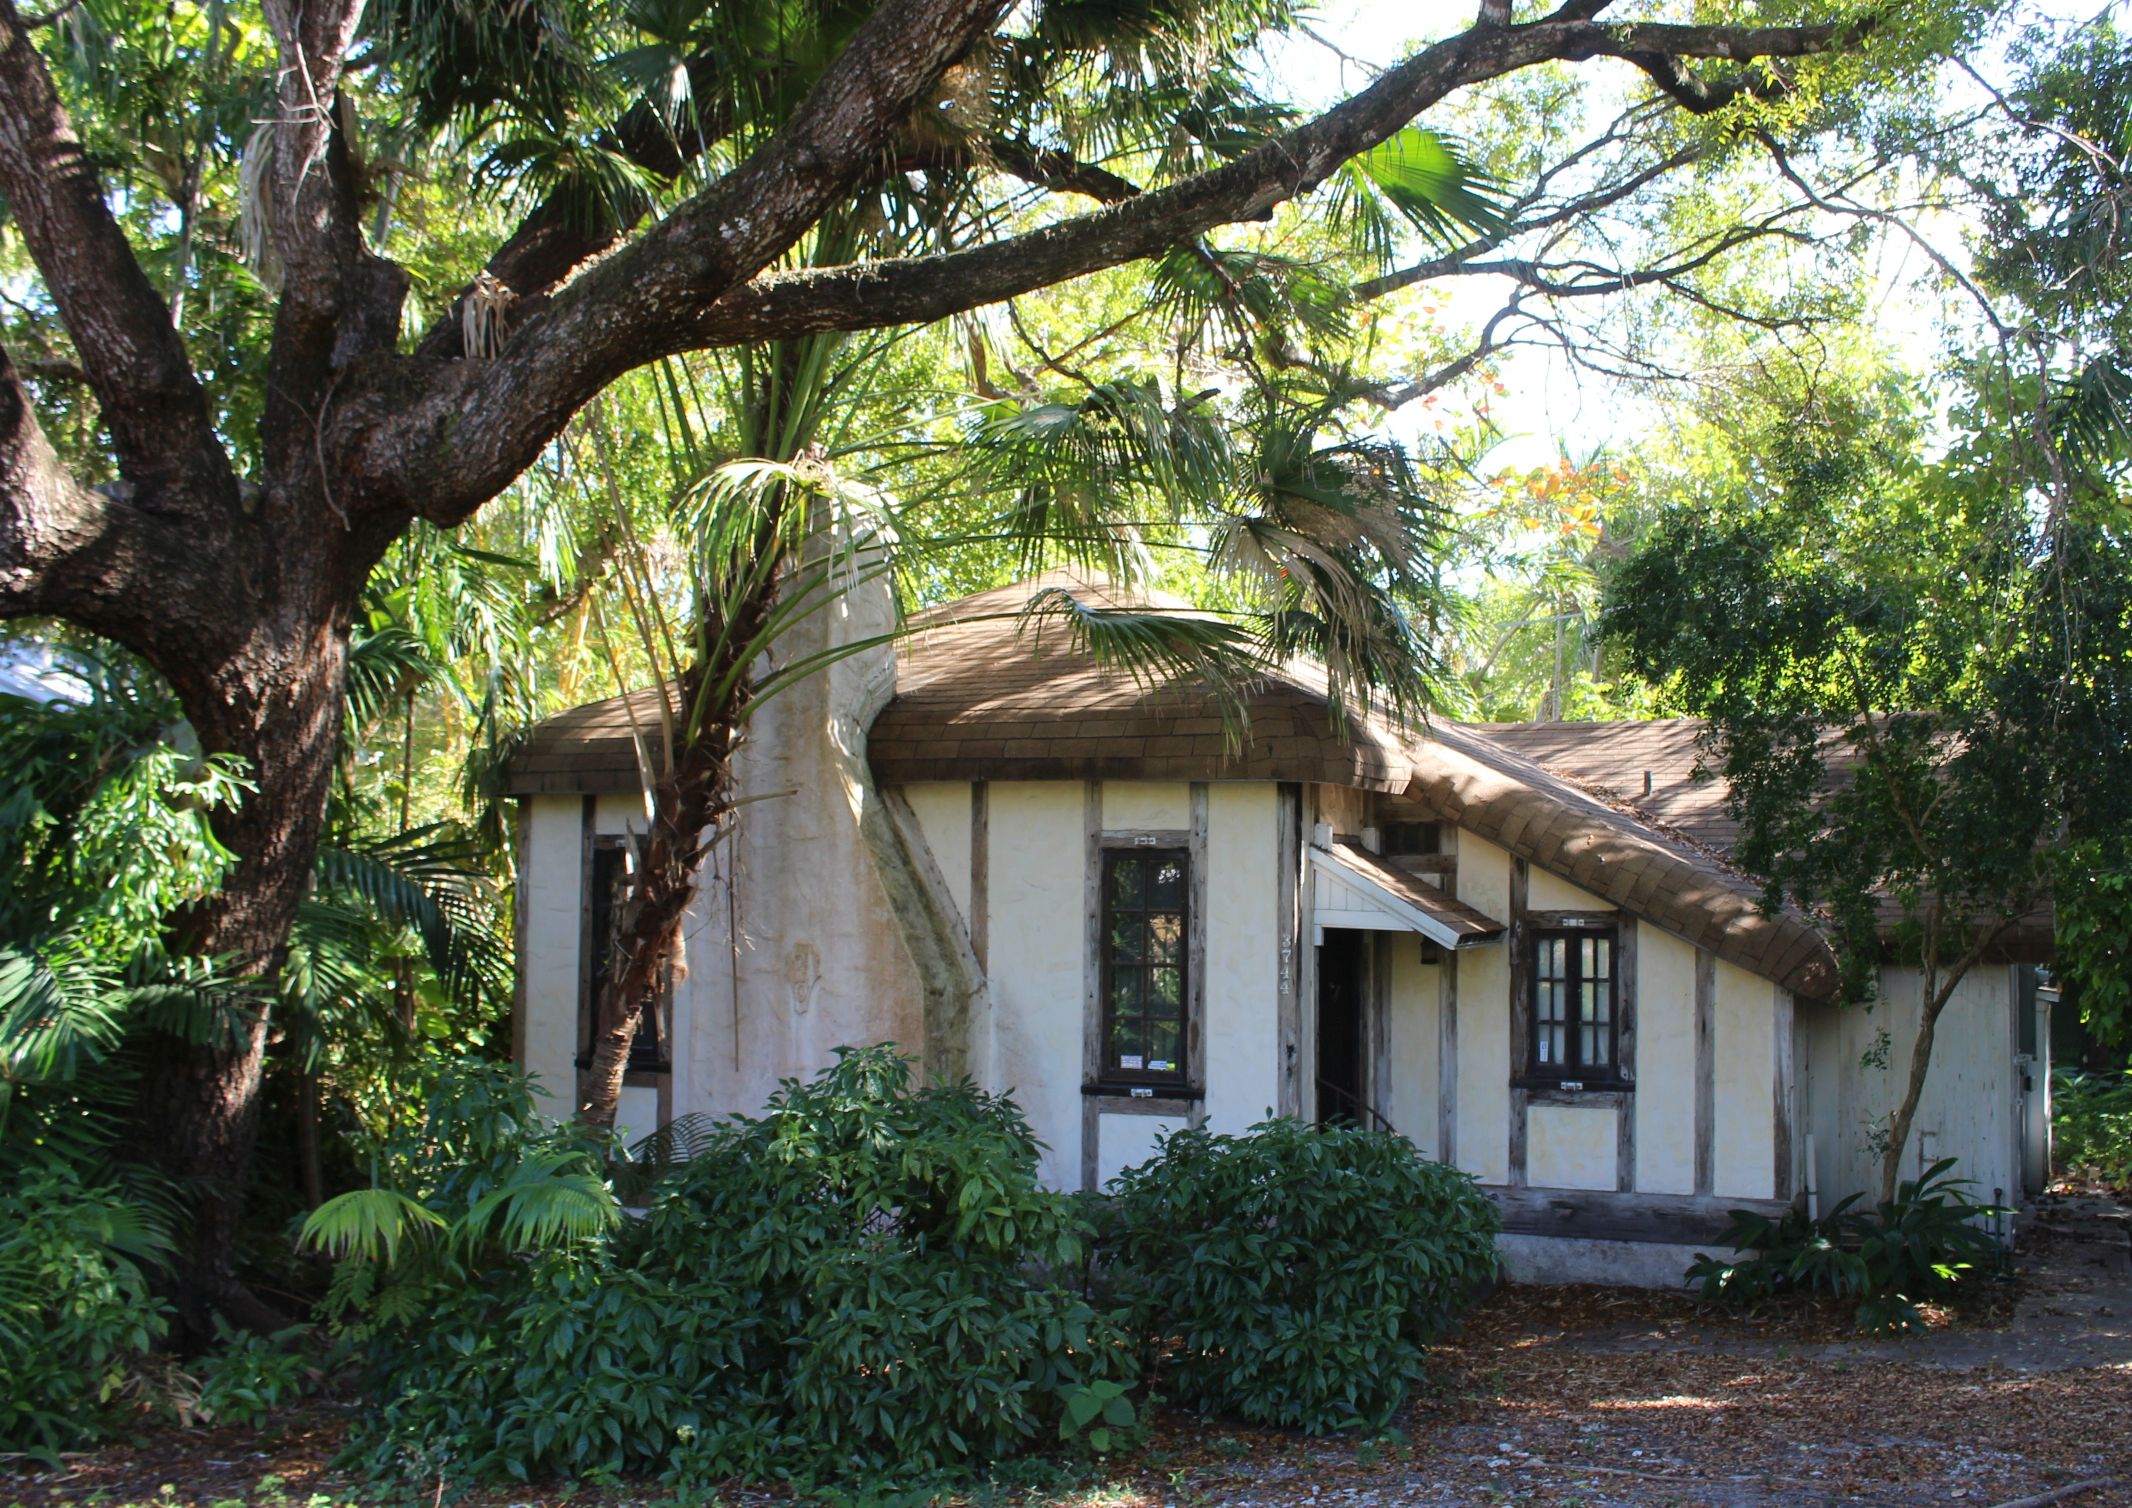 Douglas lived in a modest cottage in the Coconut Grove area south of downtown Miami. Photo by  Edwin Grosvenor.